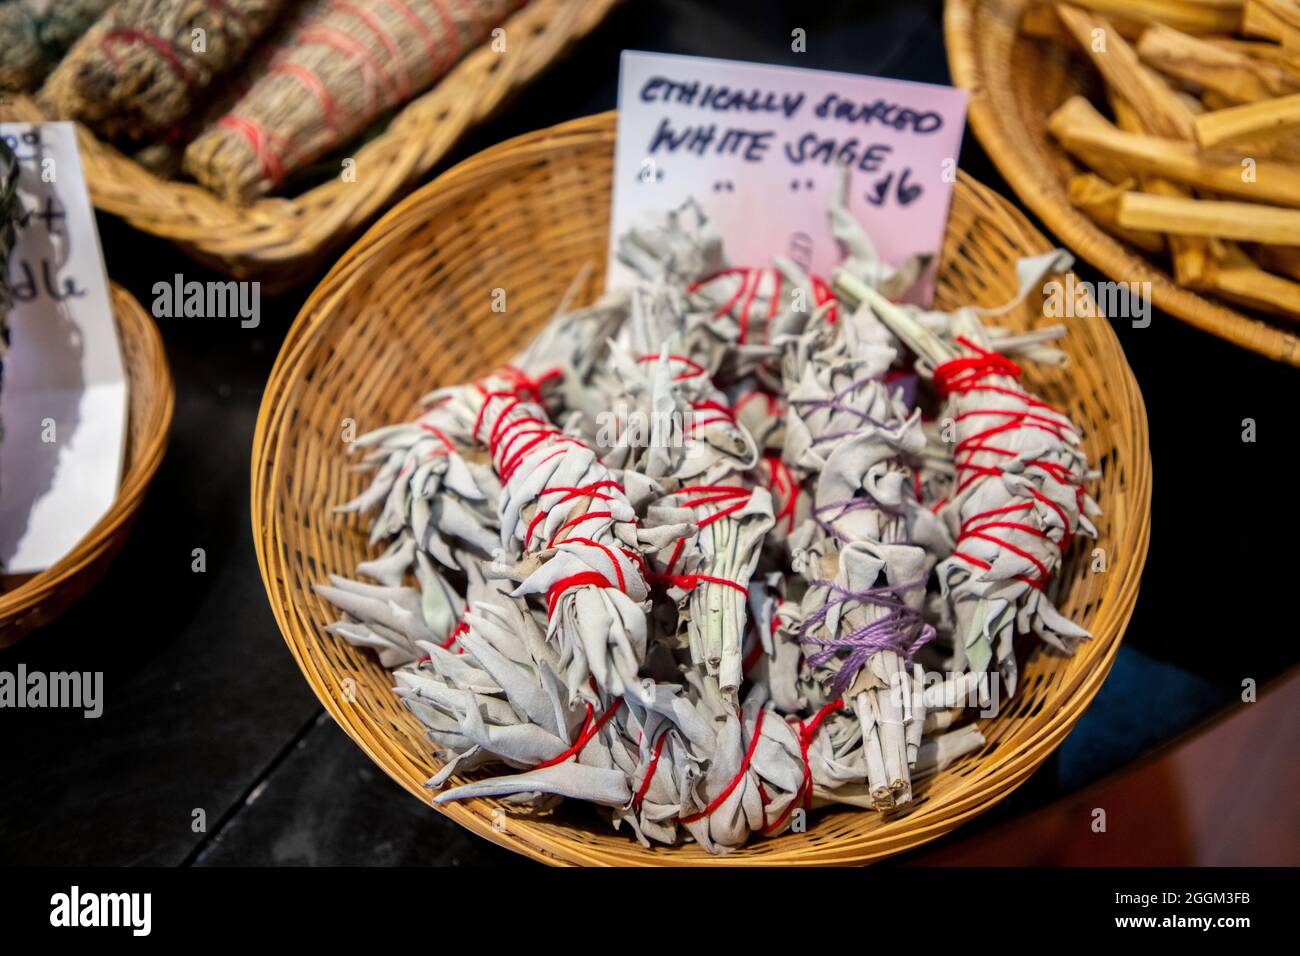 Sage smudge wands at the Scarlet Sage Herbal Apothecary on Valencia Street in The Mission District of San Francisco, California, USA. Stock Photo